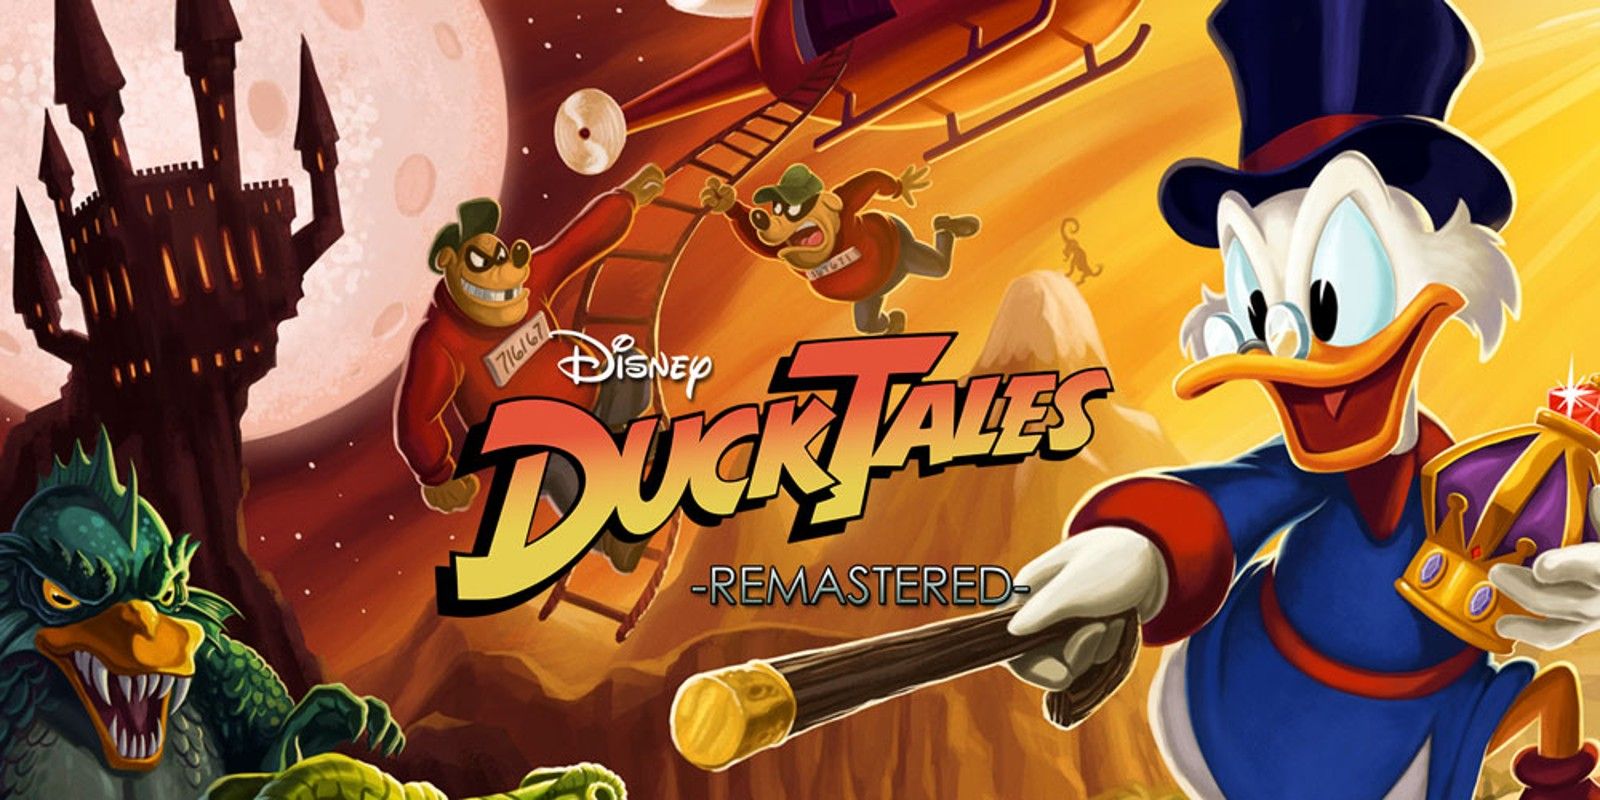 The title screen for Ducktales Remastered with Scrooge McDuck